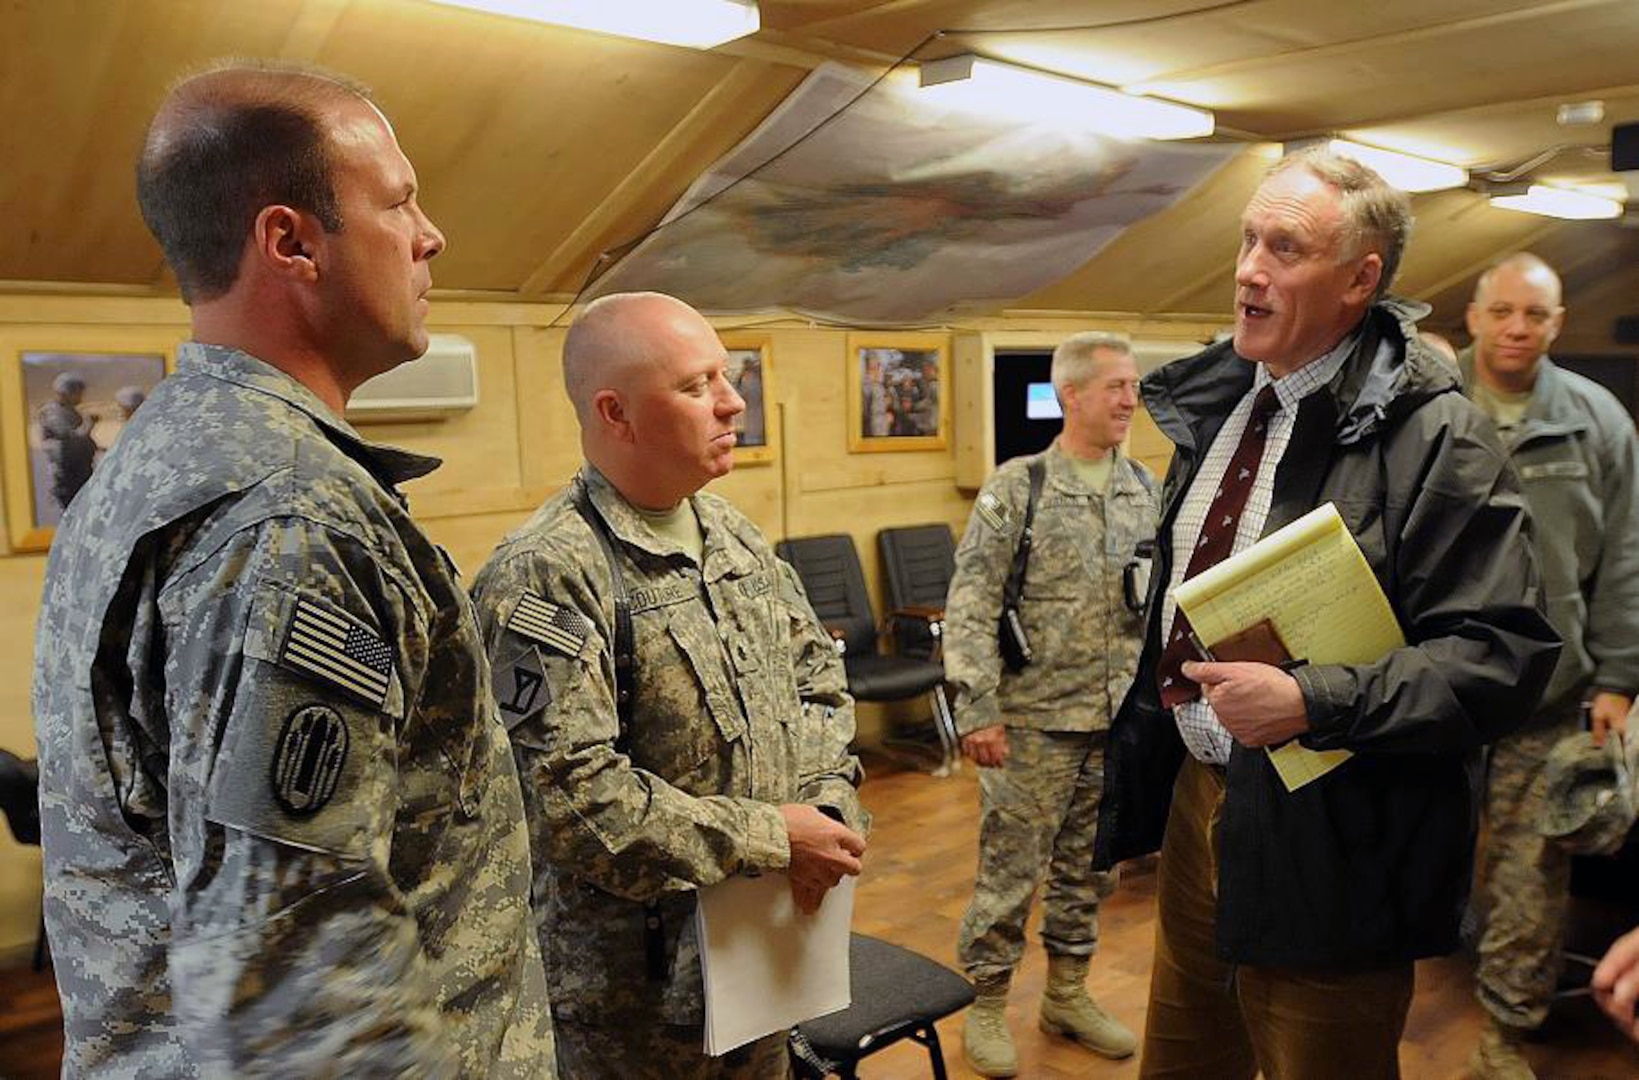 British Parliament member Mr. Julian Brazier, right, visits with Army Lt. Col. Andy Gerlach, left, 196th Maneuver Enhancement Brigade, South Dakota National Guard, and Army Lt. Col. Anthony Couture, 1-181st Infantry Regiment, Massachusetts National Guard, Feb. 22, 2011, at Camp Phoenix, in Kabul, Afghanistan. Brazier met Soldiers from several National Guard states in an effort to help assess the future of Britain's Reserve component by looking at the National Guard model and how it supports operations overseas and domestic operations, professionally develops its servicemembers and provides educational benefits.